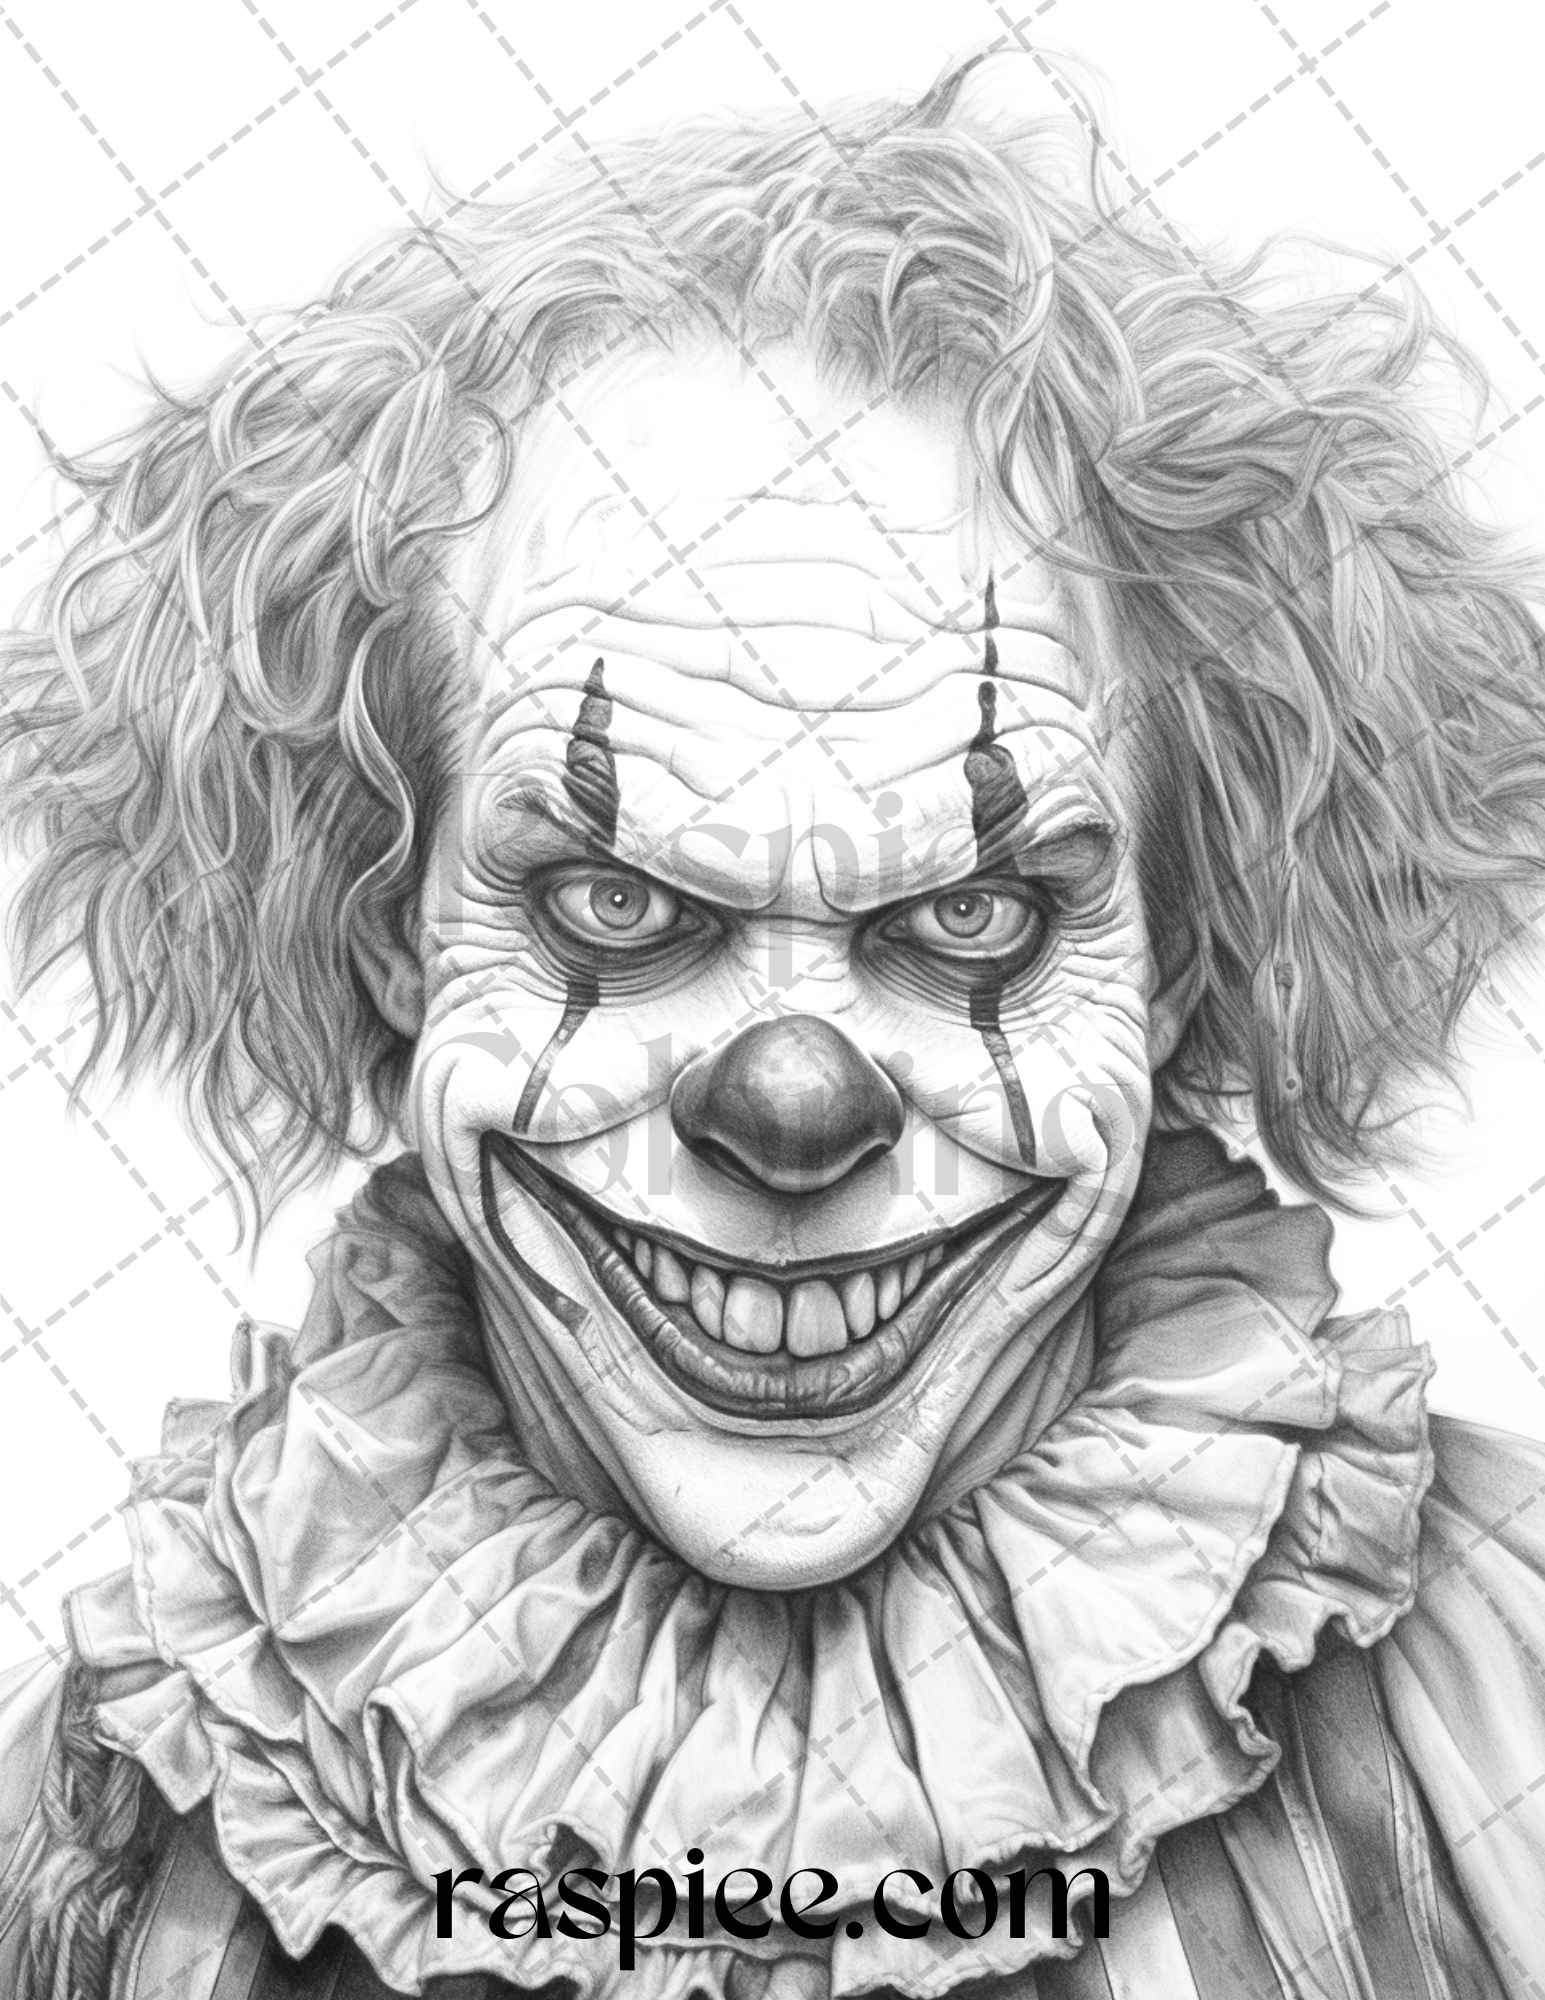 Spooky Clowns Grayscale Coloring Pages Printable for Adults, Halloween-themed adult coloring book, Creepy clown illustrations for grayscale coloring, Haunting black and white coloring pages, Horror-themed printable coloring sheets, Scary clowns coloring for adults, Spooky circus art grayscale printables